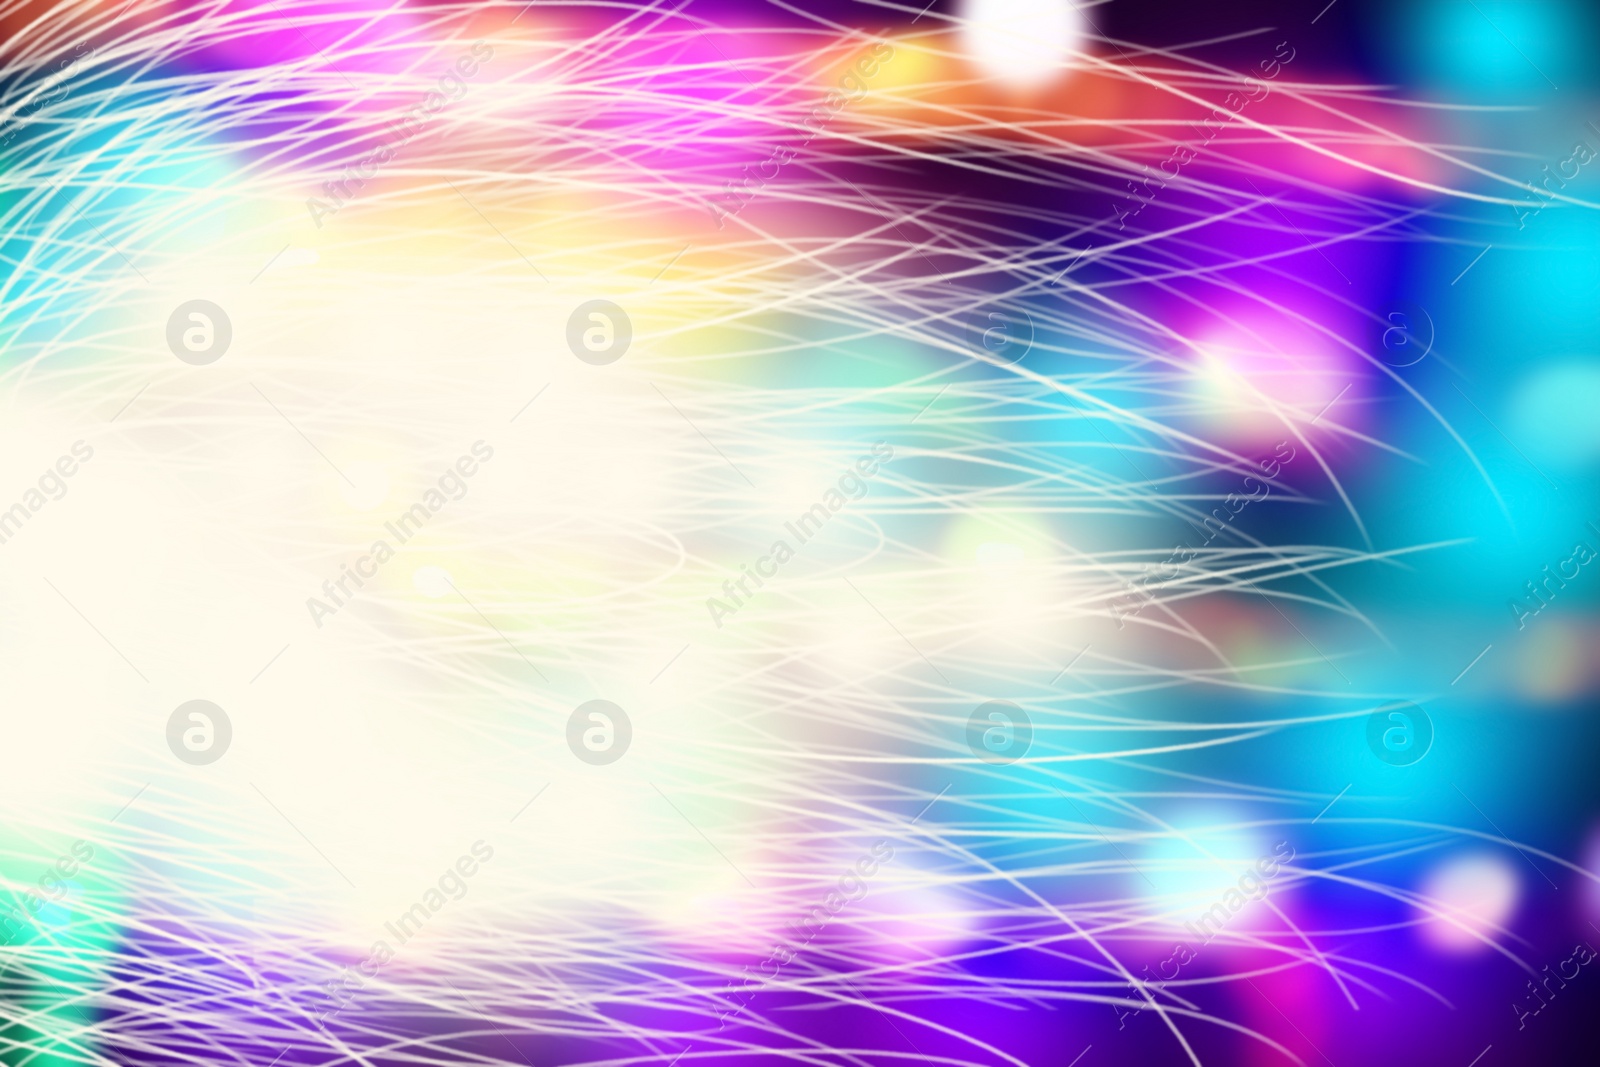 Image of Blurred view of abstract bright colorful background with sparks and bokeh effect 